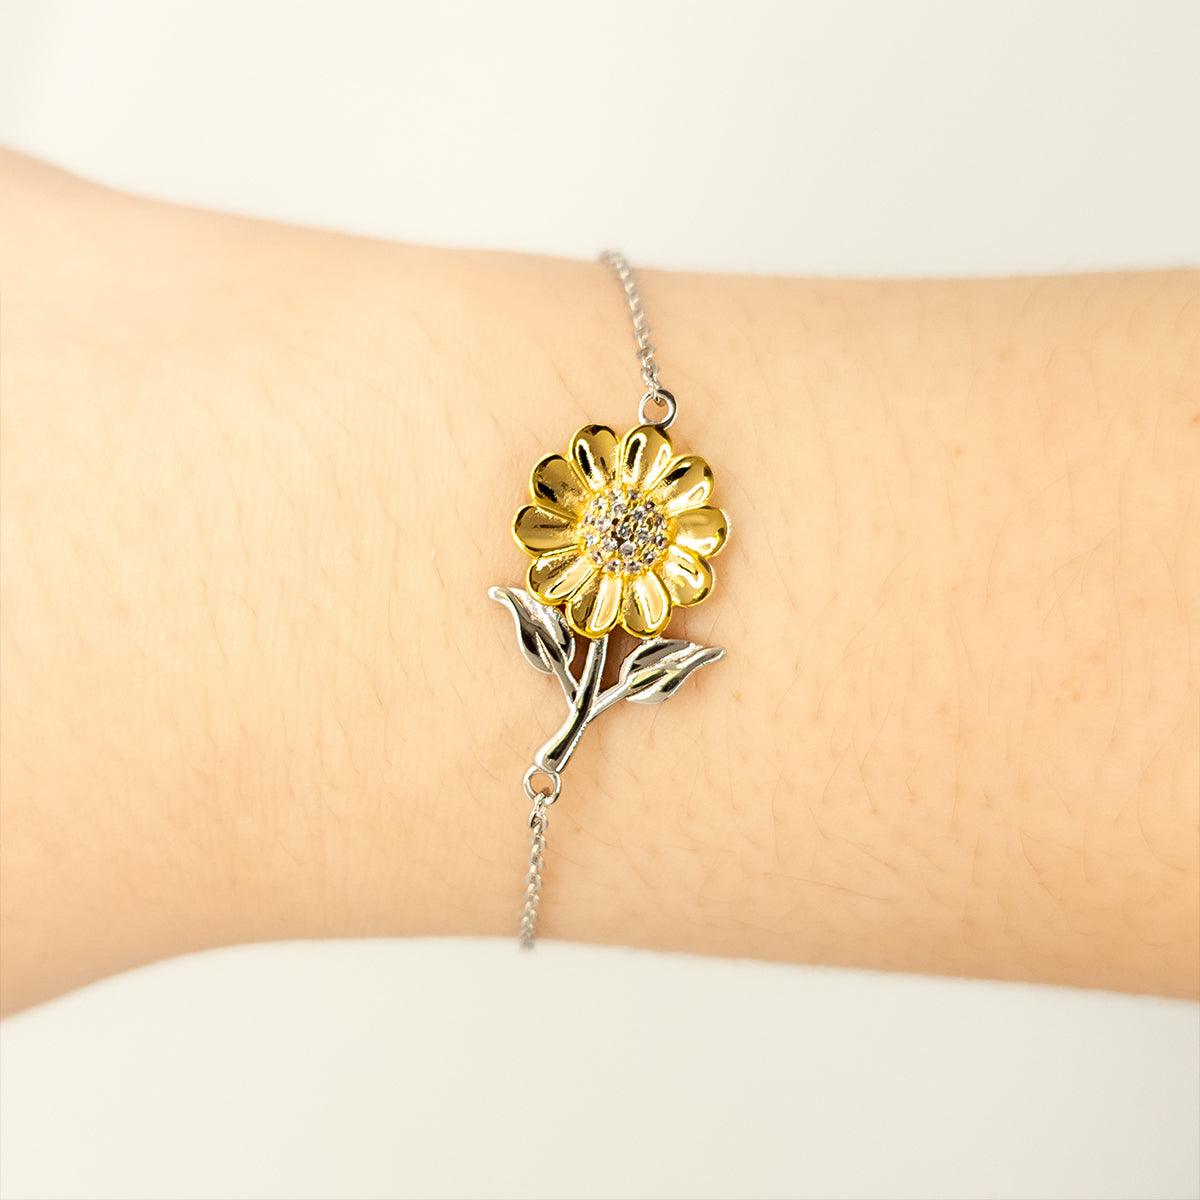 Remarkable Correctional Officer Gifts, Your dedication and hard work, Inspirational Birthday Christmas Unique Sunflower Bracelet For Correctional Officer, Coworkers, Men, Women, Friends - Mallard Moon Gift Shop